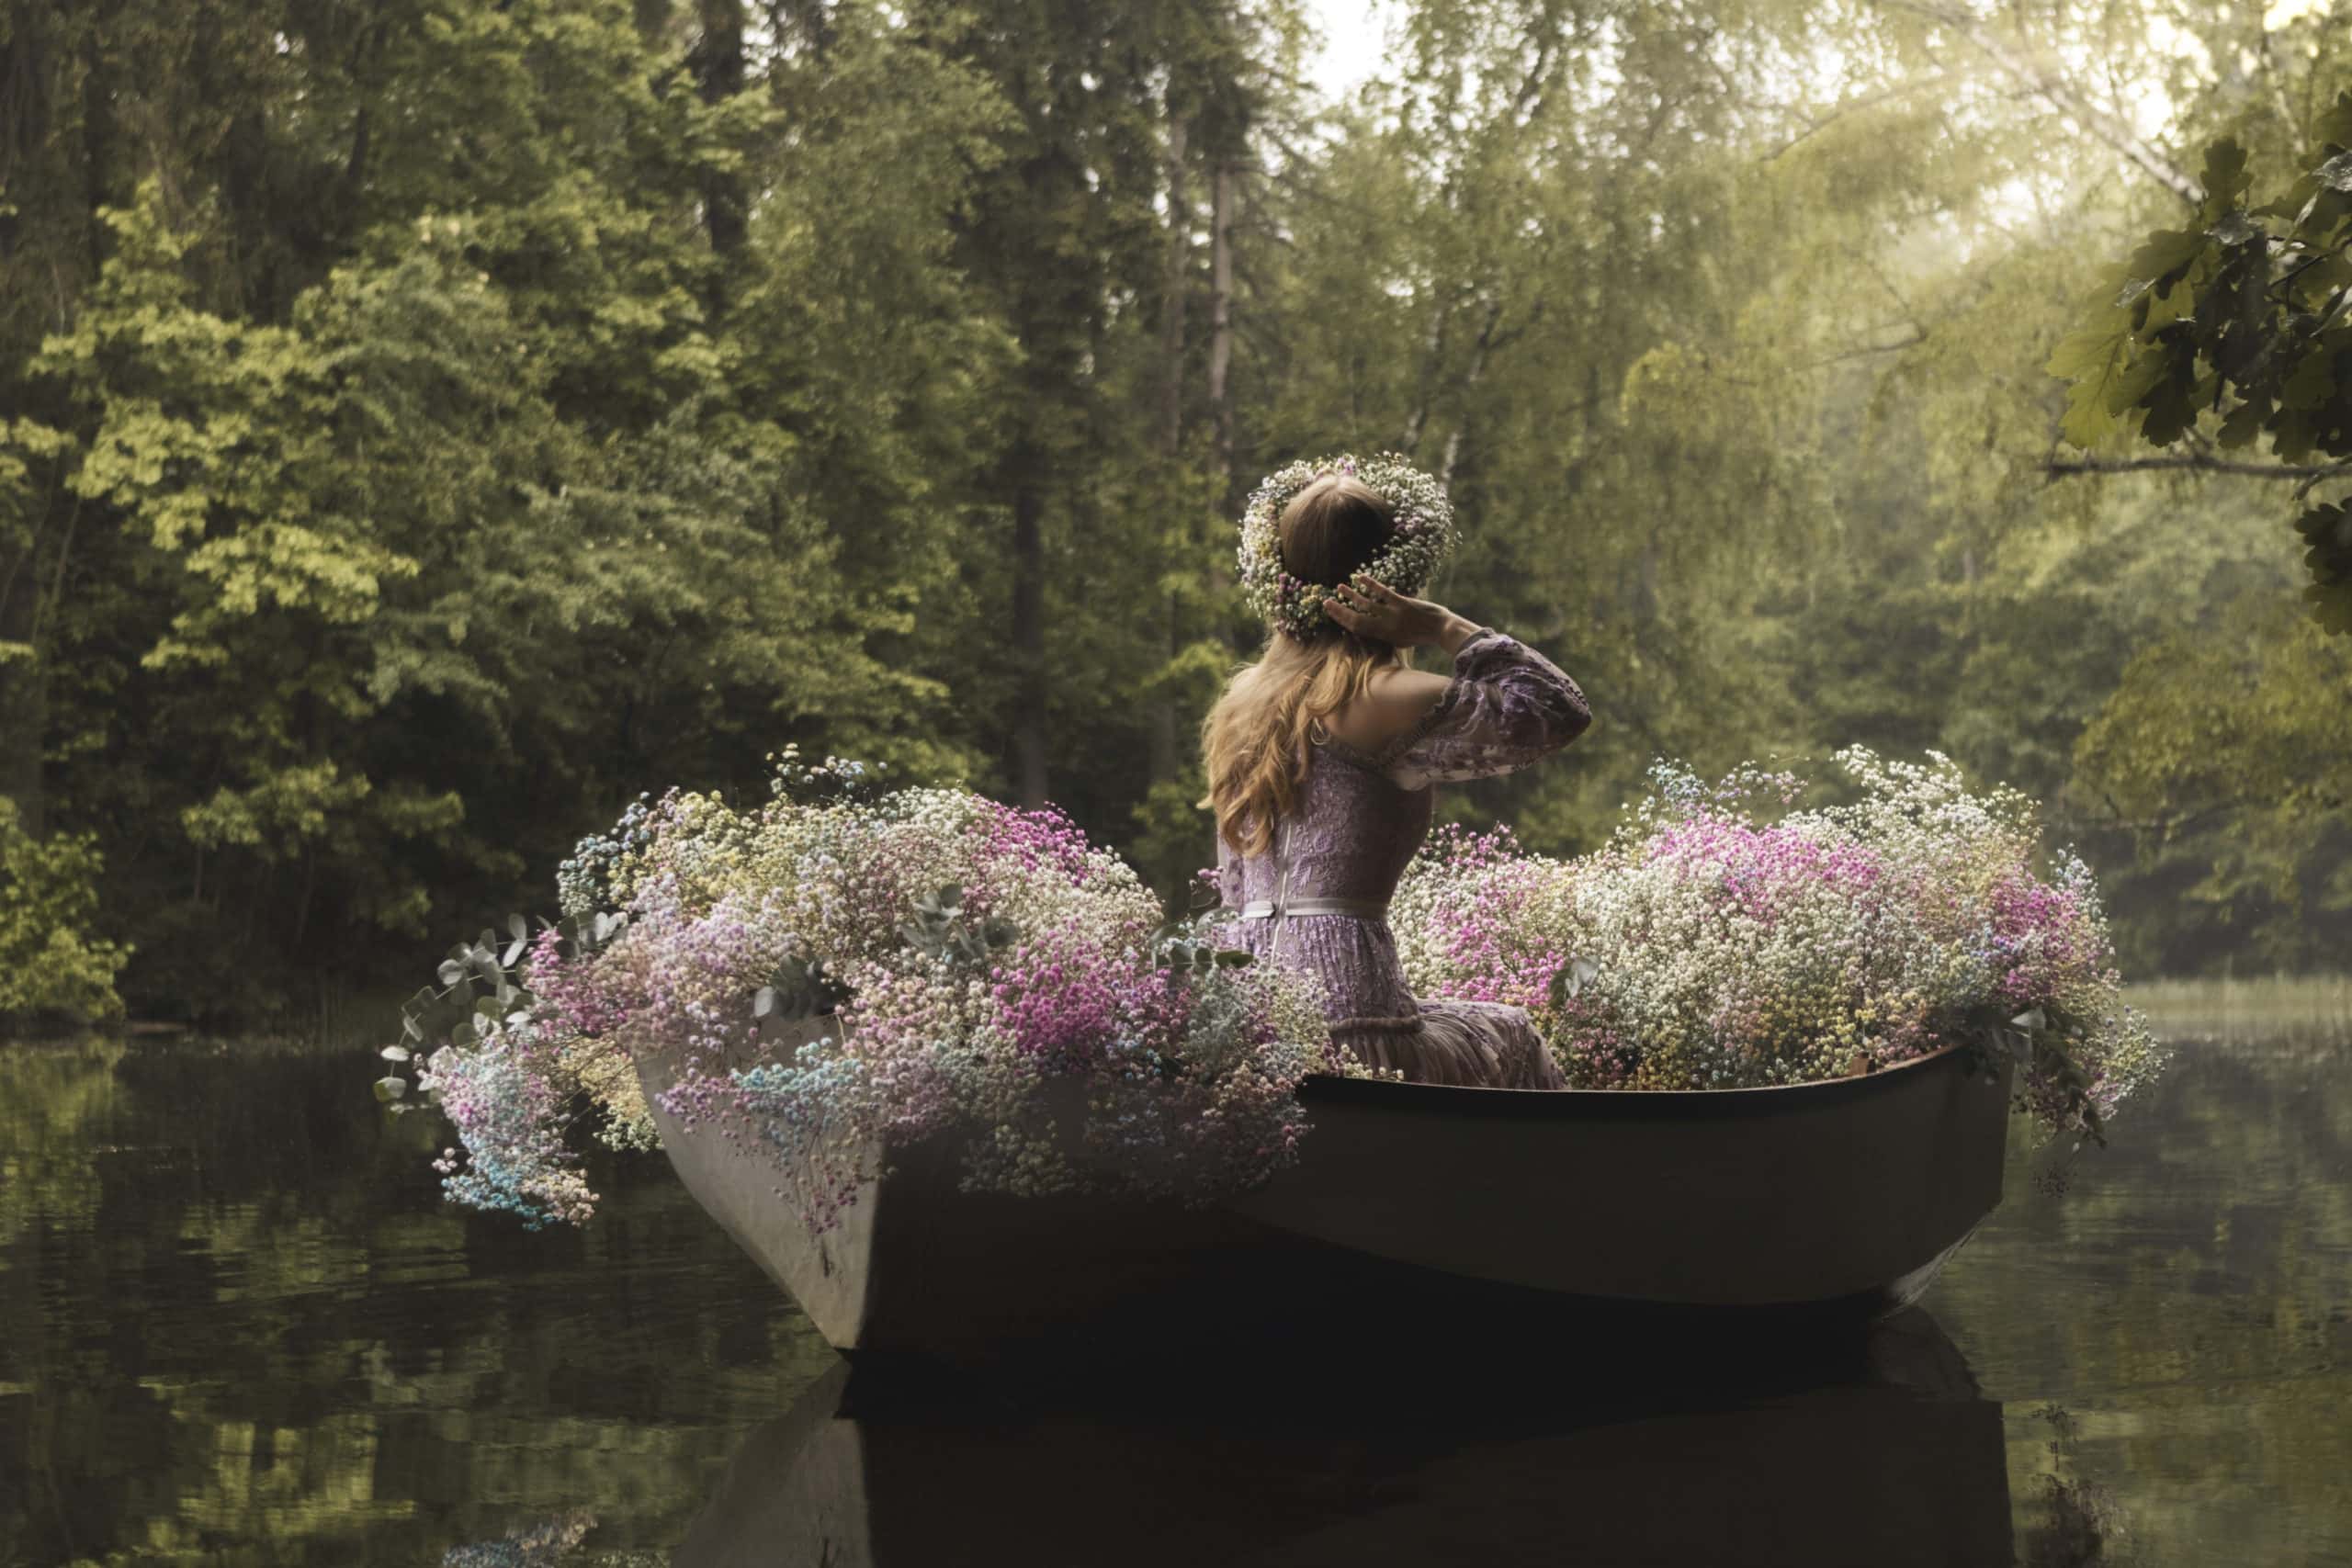 Woman in a boat decorated with flowers floats on the lake in the forest.